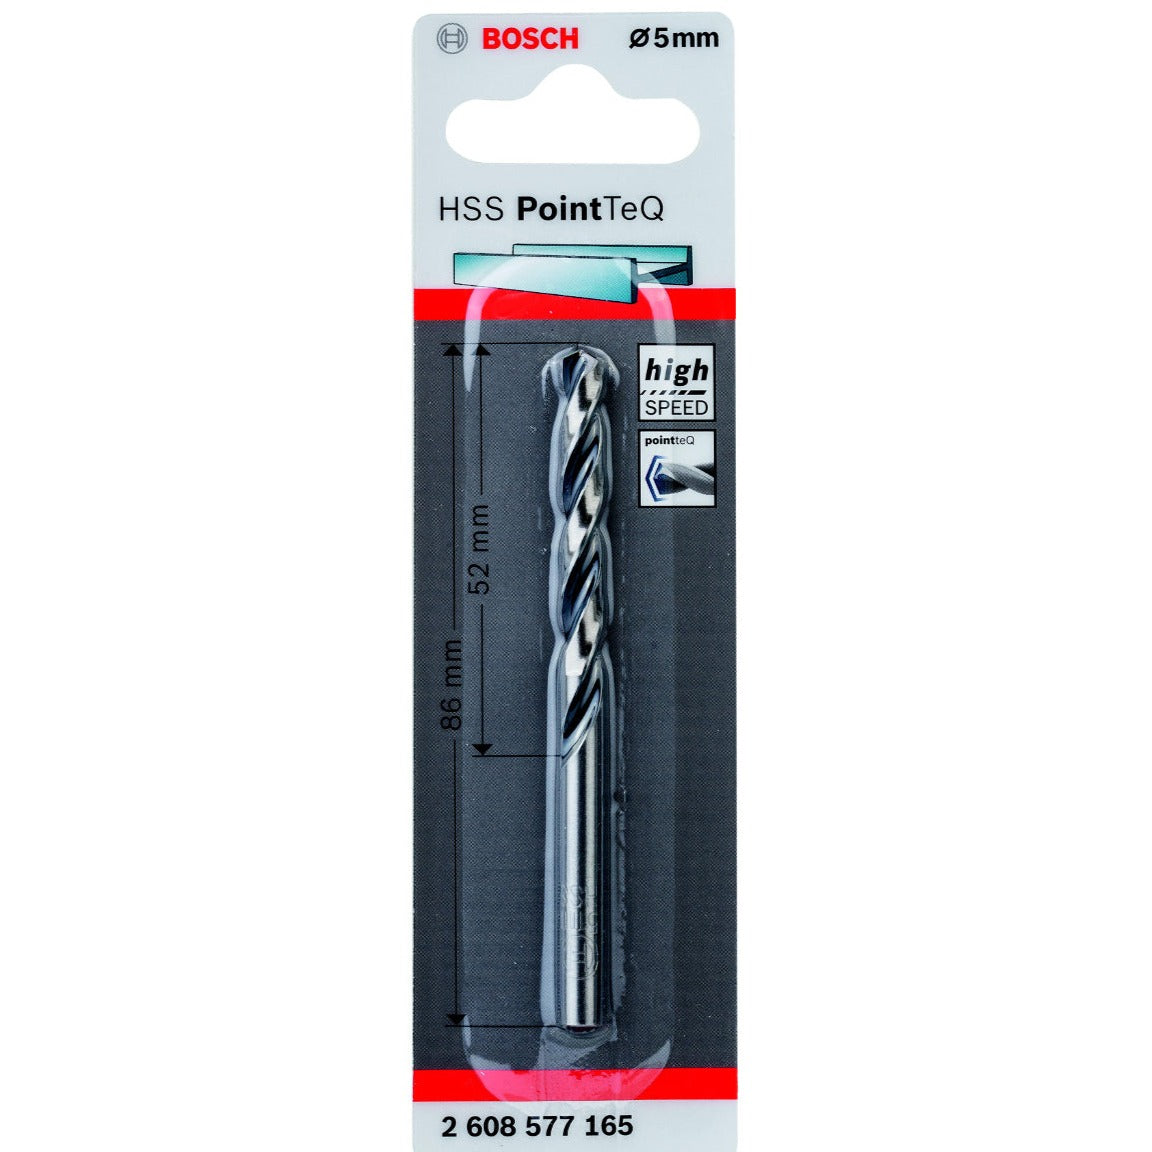 Bosch HSS PointTeq HSS Drill Bits ( Select Size ) Power Tool Services